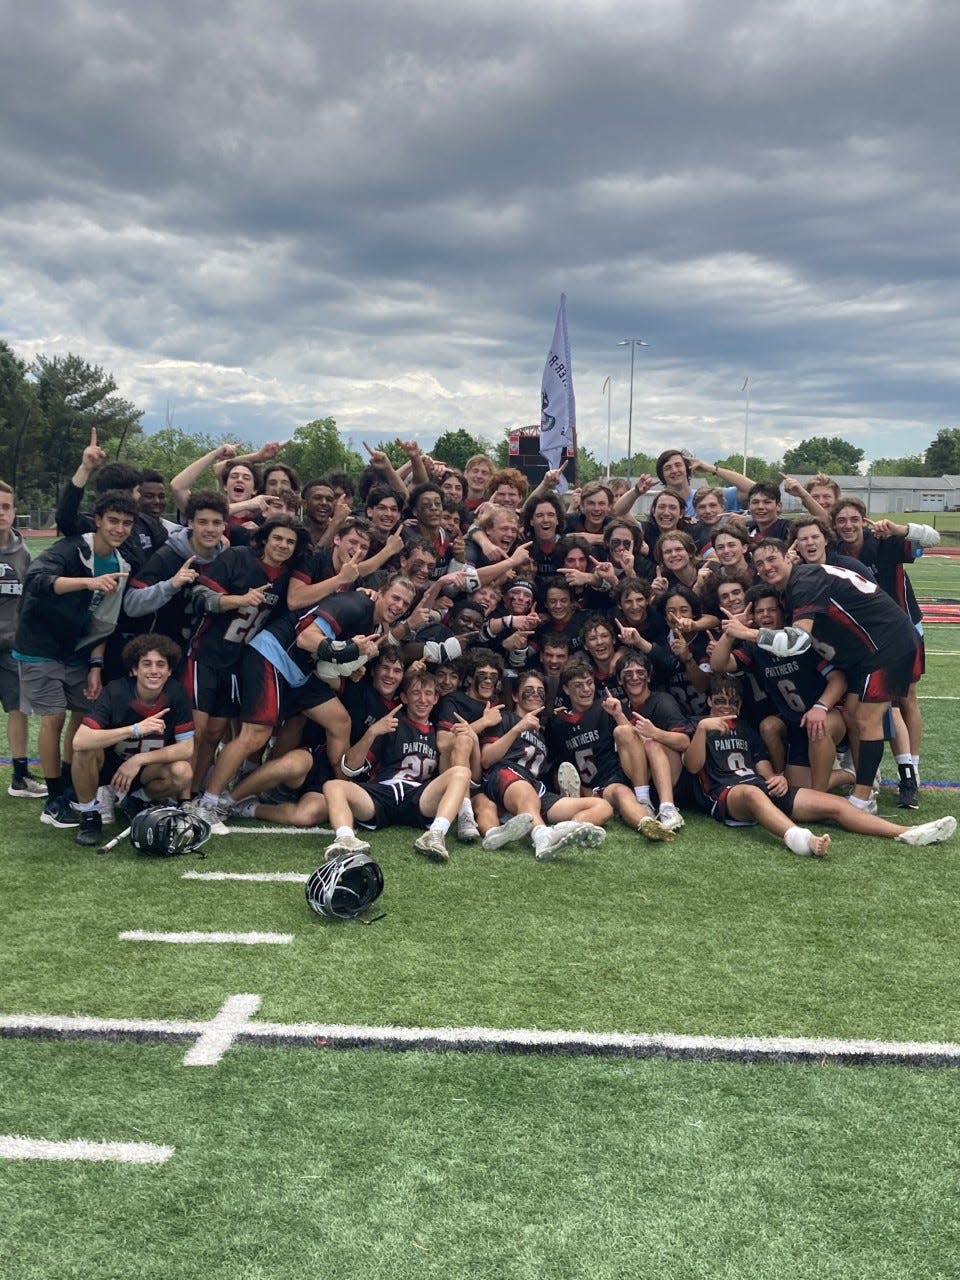 The Bridgewater-Raritan boys lacrosse team celebrates after winning the North Group 4 title on May 28, 2022